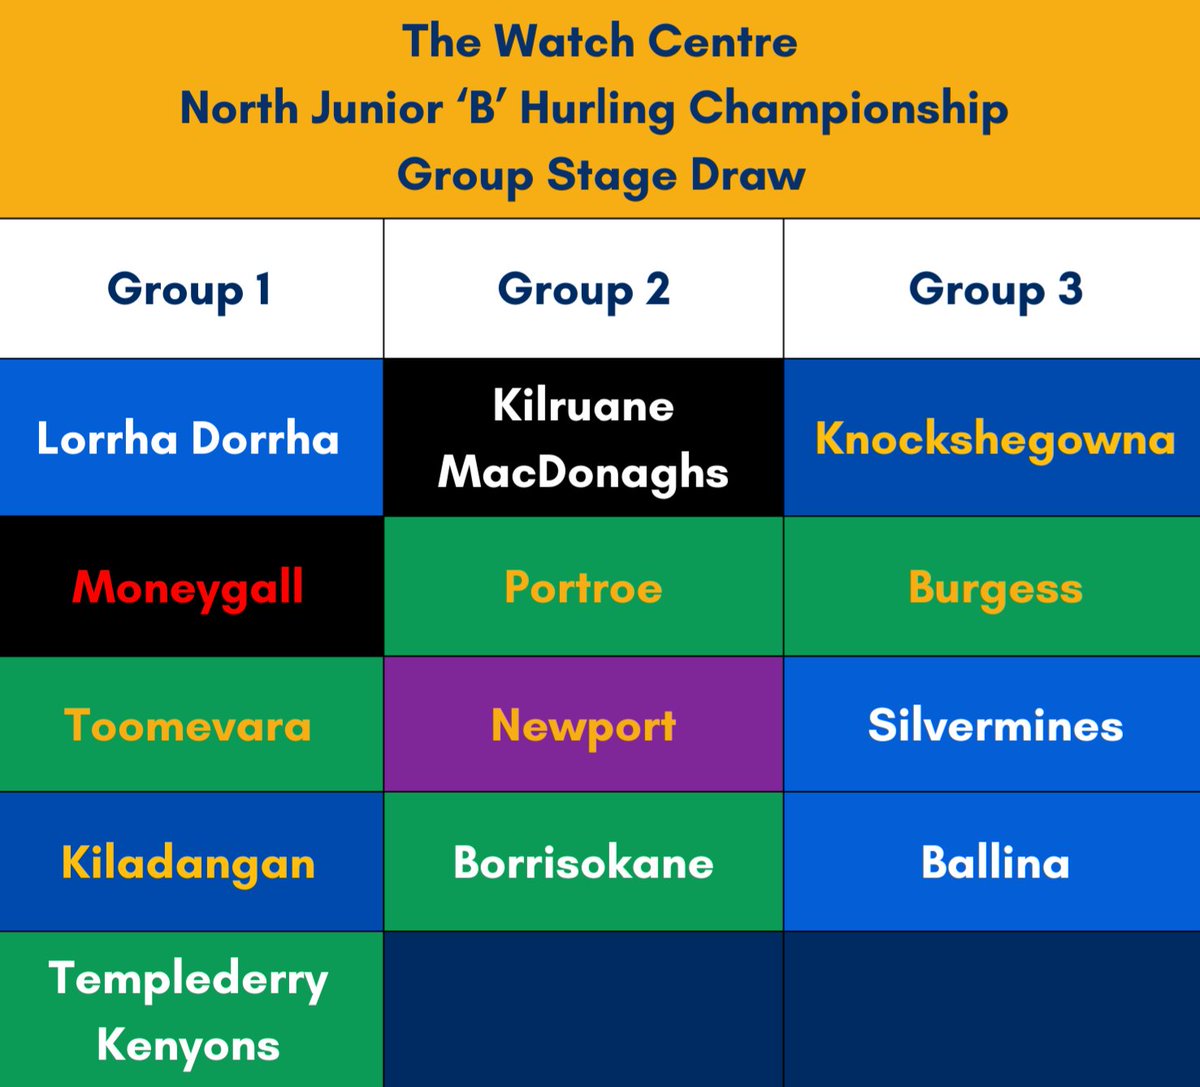 The Watch Centre North Junior 'B' Hurling Championship Draws Top two teams in each group progress to the knockout stages